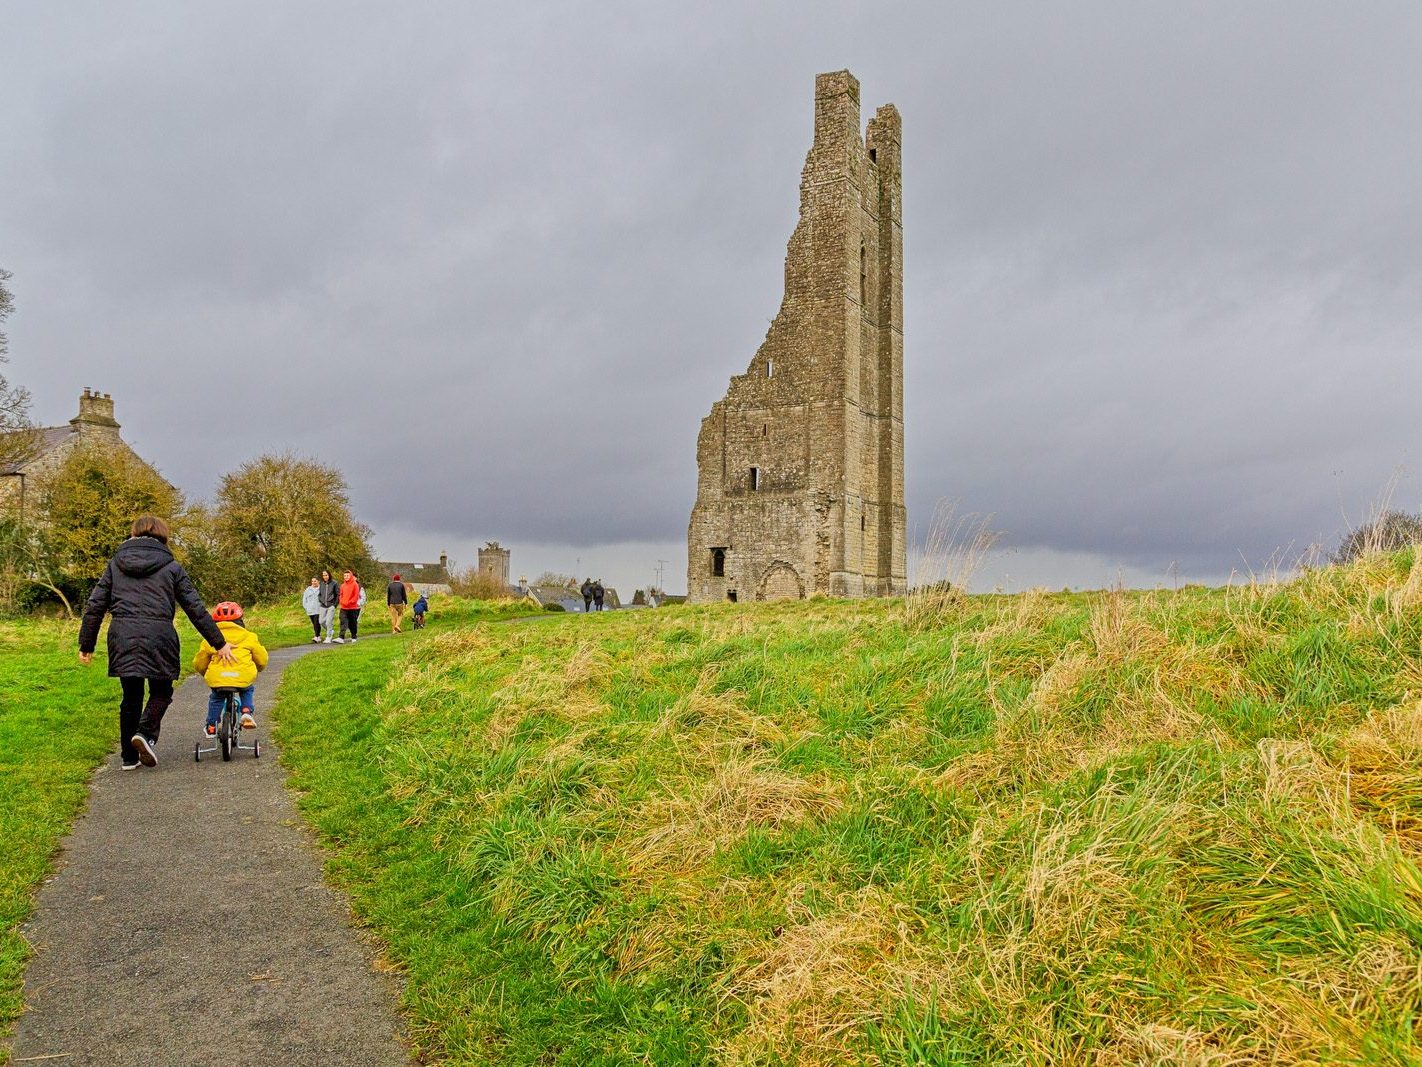 THE YELLOW STEEPLE DOMINATES THE TOWN OF TRIM [ALSO KNOWN AS ST MARYS ABBEY]-226751-1